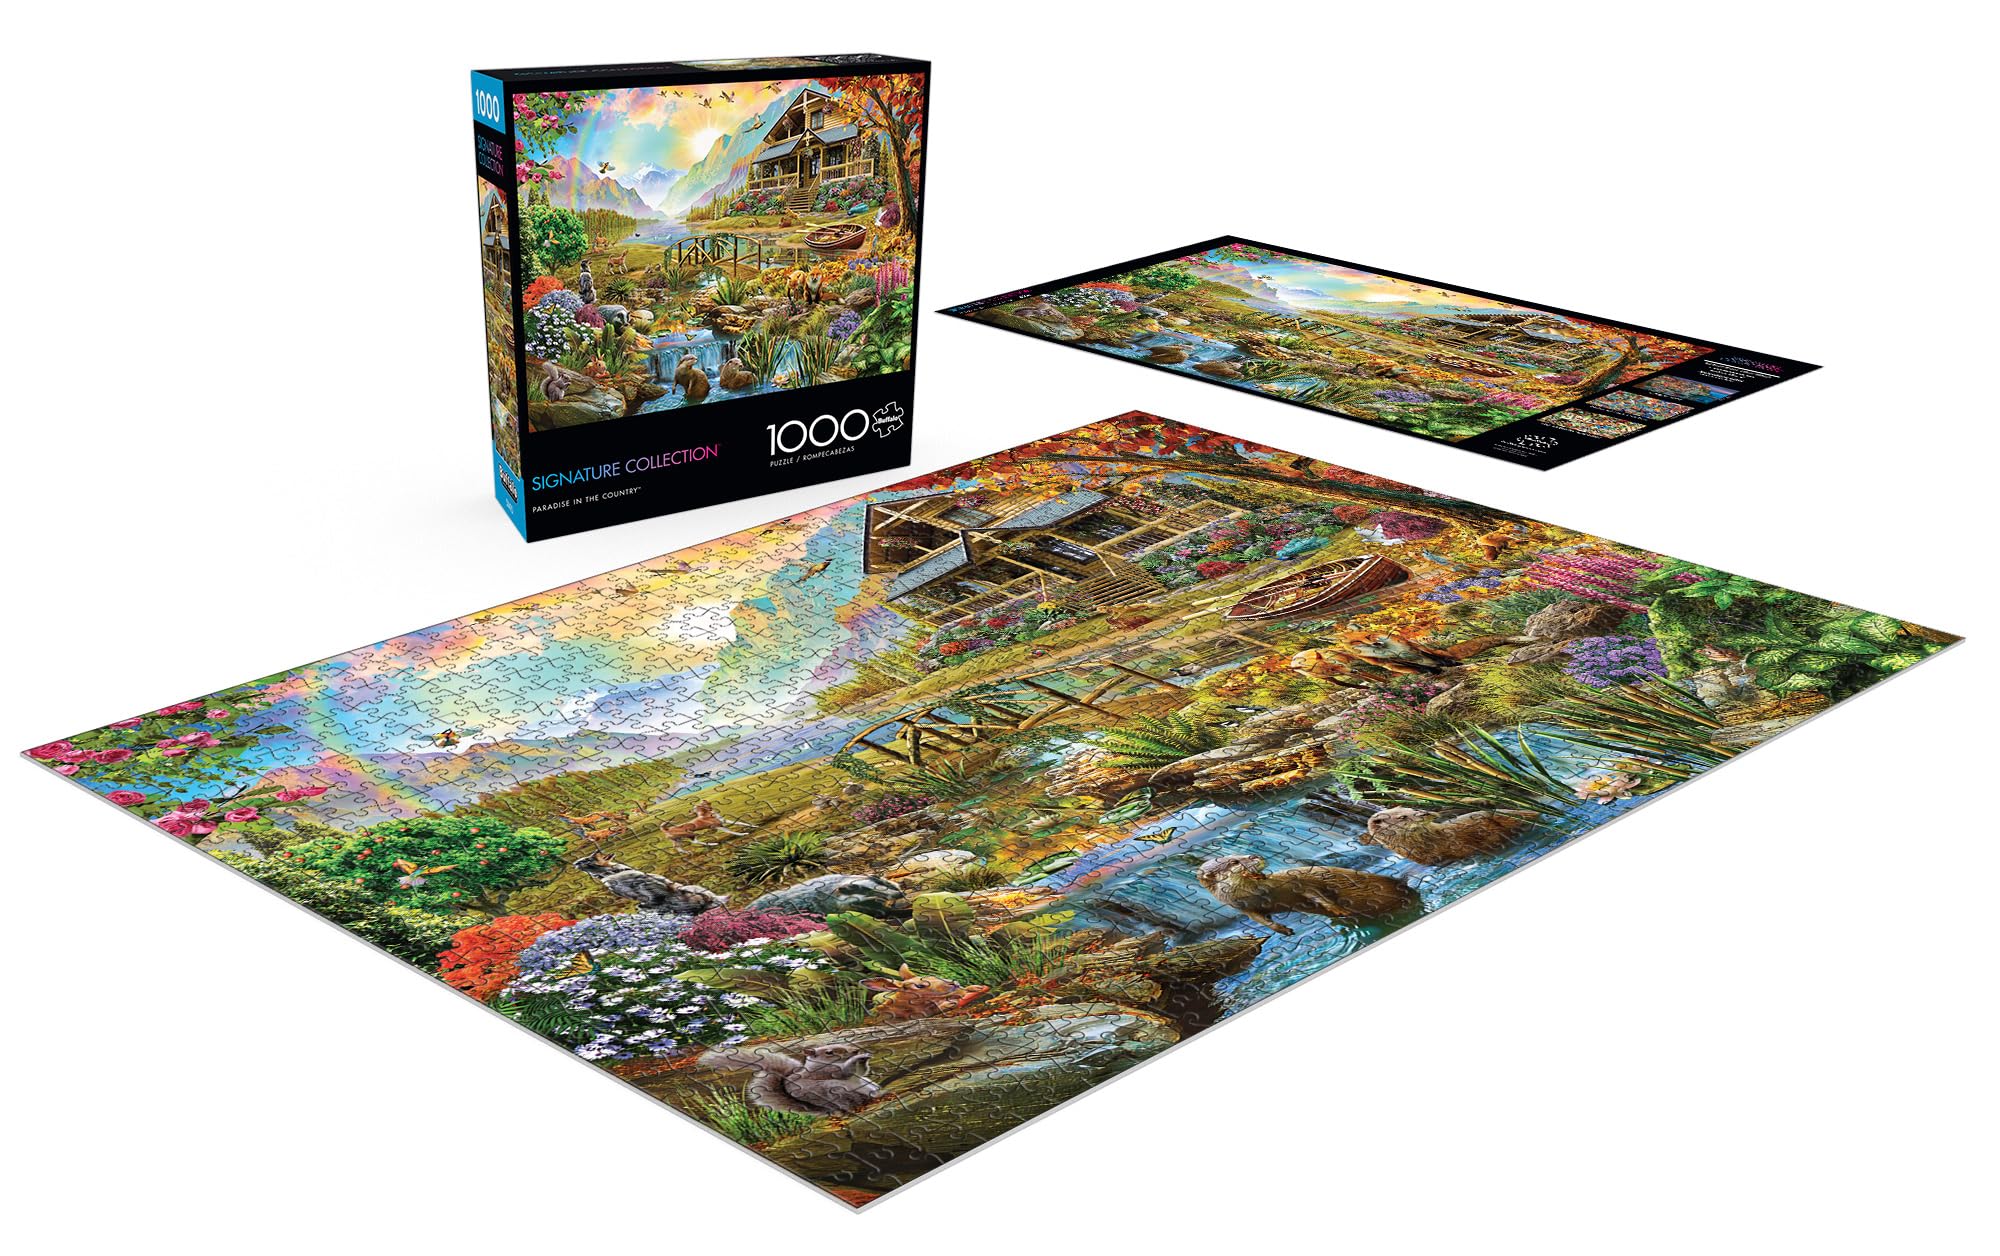 Buffalo Games - Paradise in The Country - 1000 Piece Jigsaw Puzzle for Adults Challenging Puzzle Perfect for Game Nights - Finished Size 26.75 x 19.75